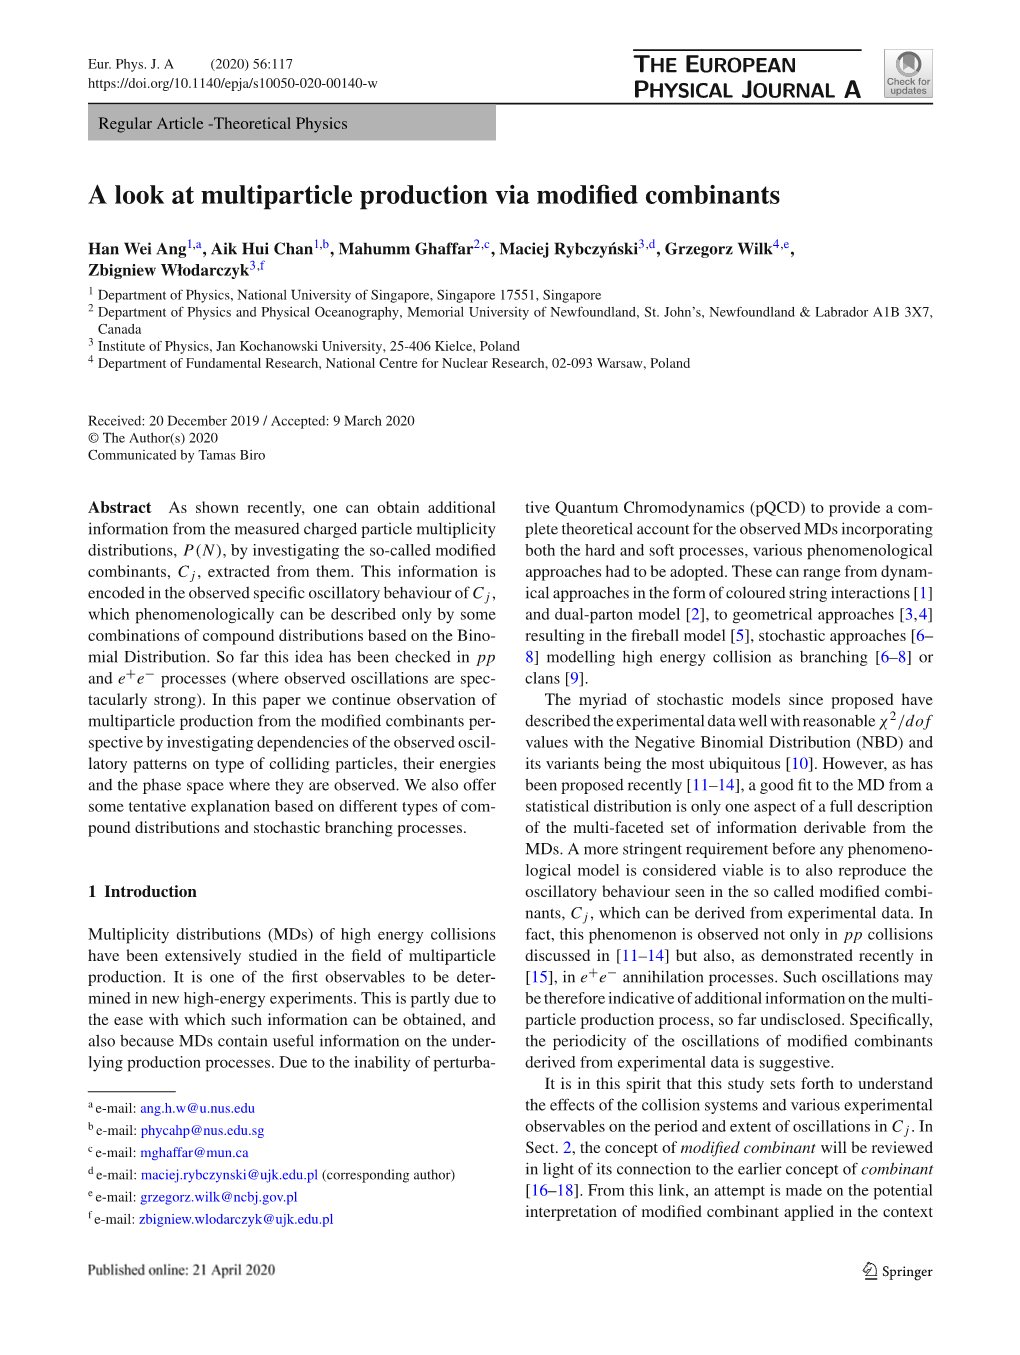 A Look at Multiparticle Production Via Modified Combinants